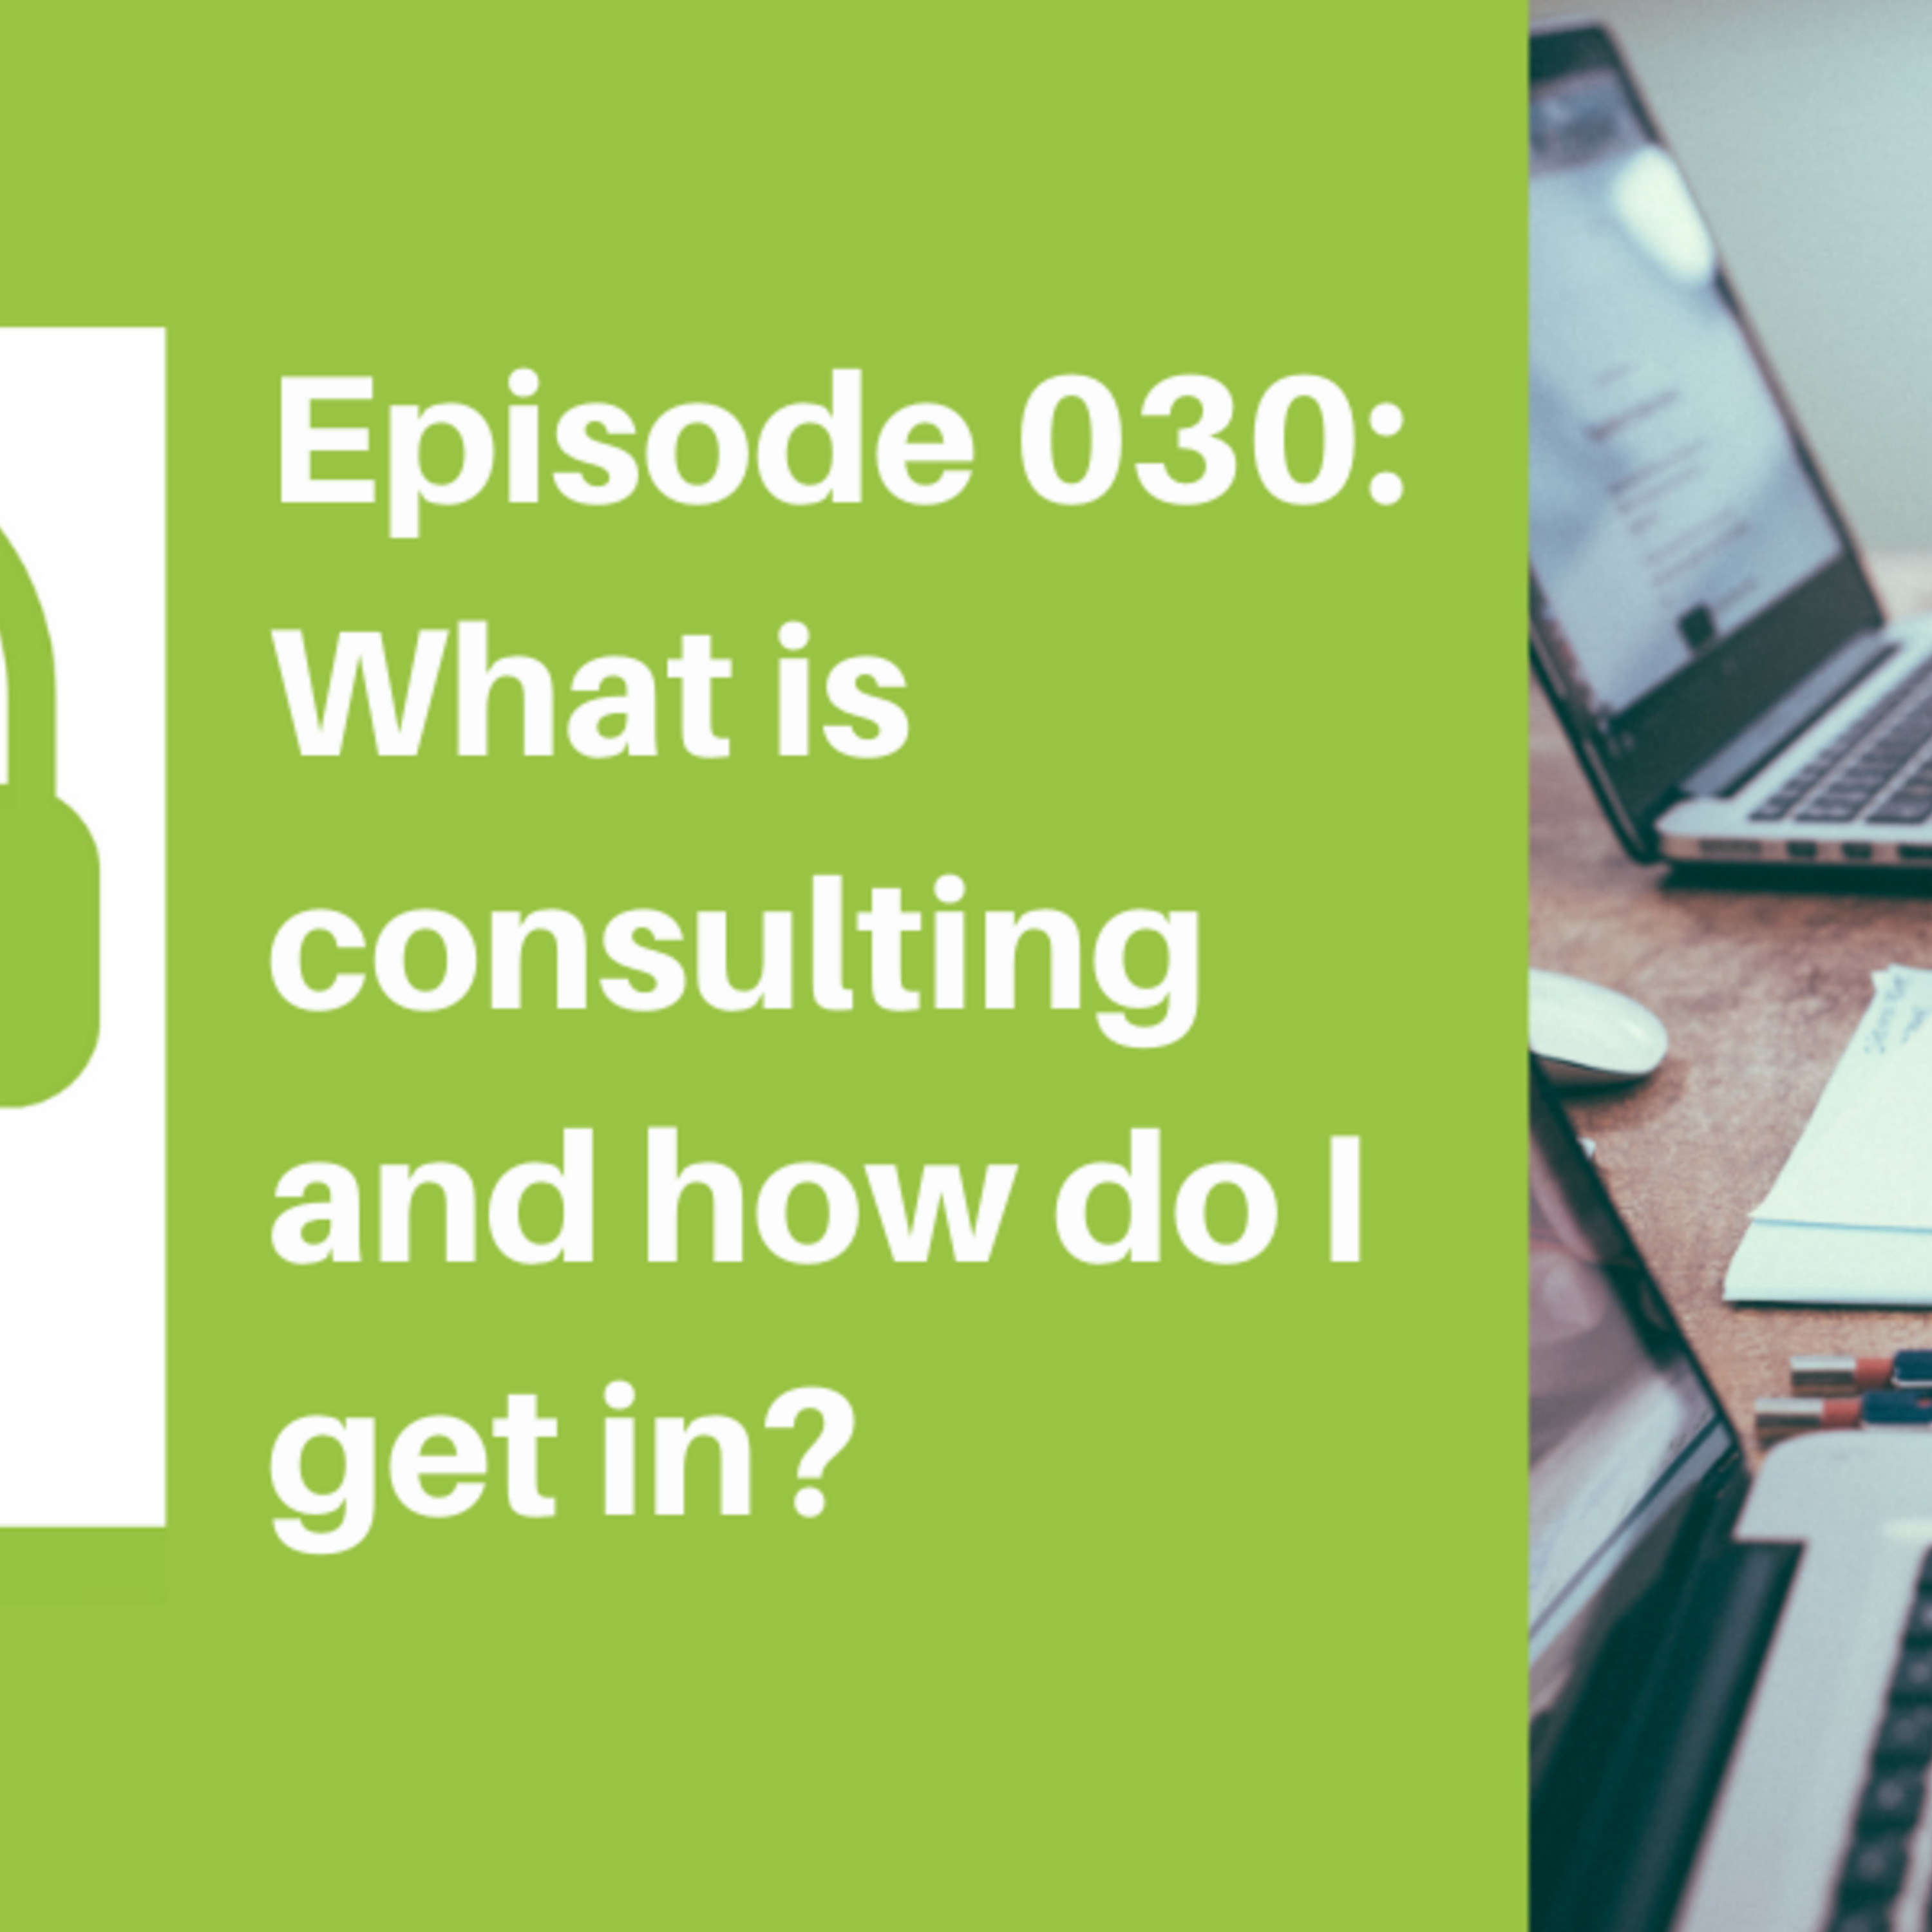 Episode 030: What Is Consulting and How Do I Get In?